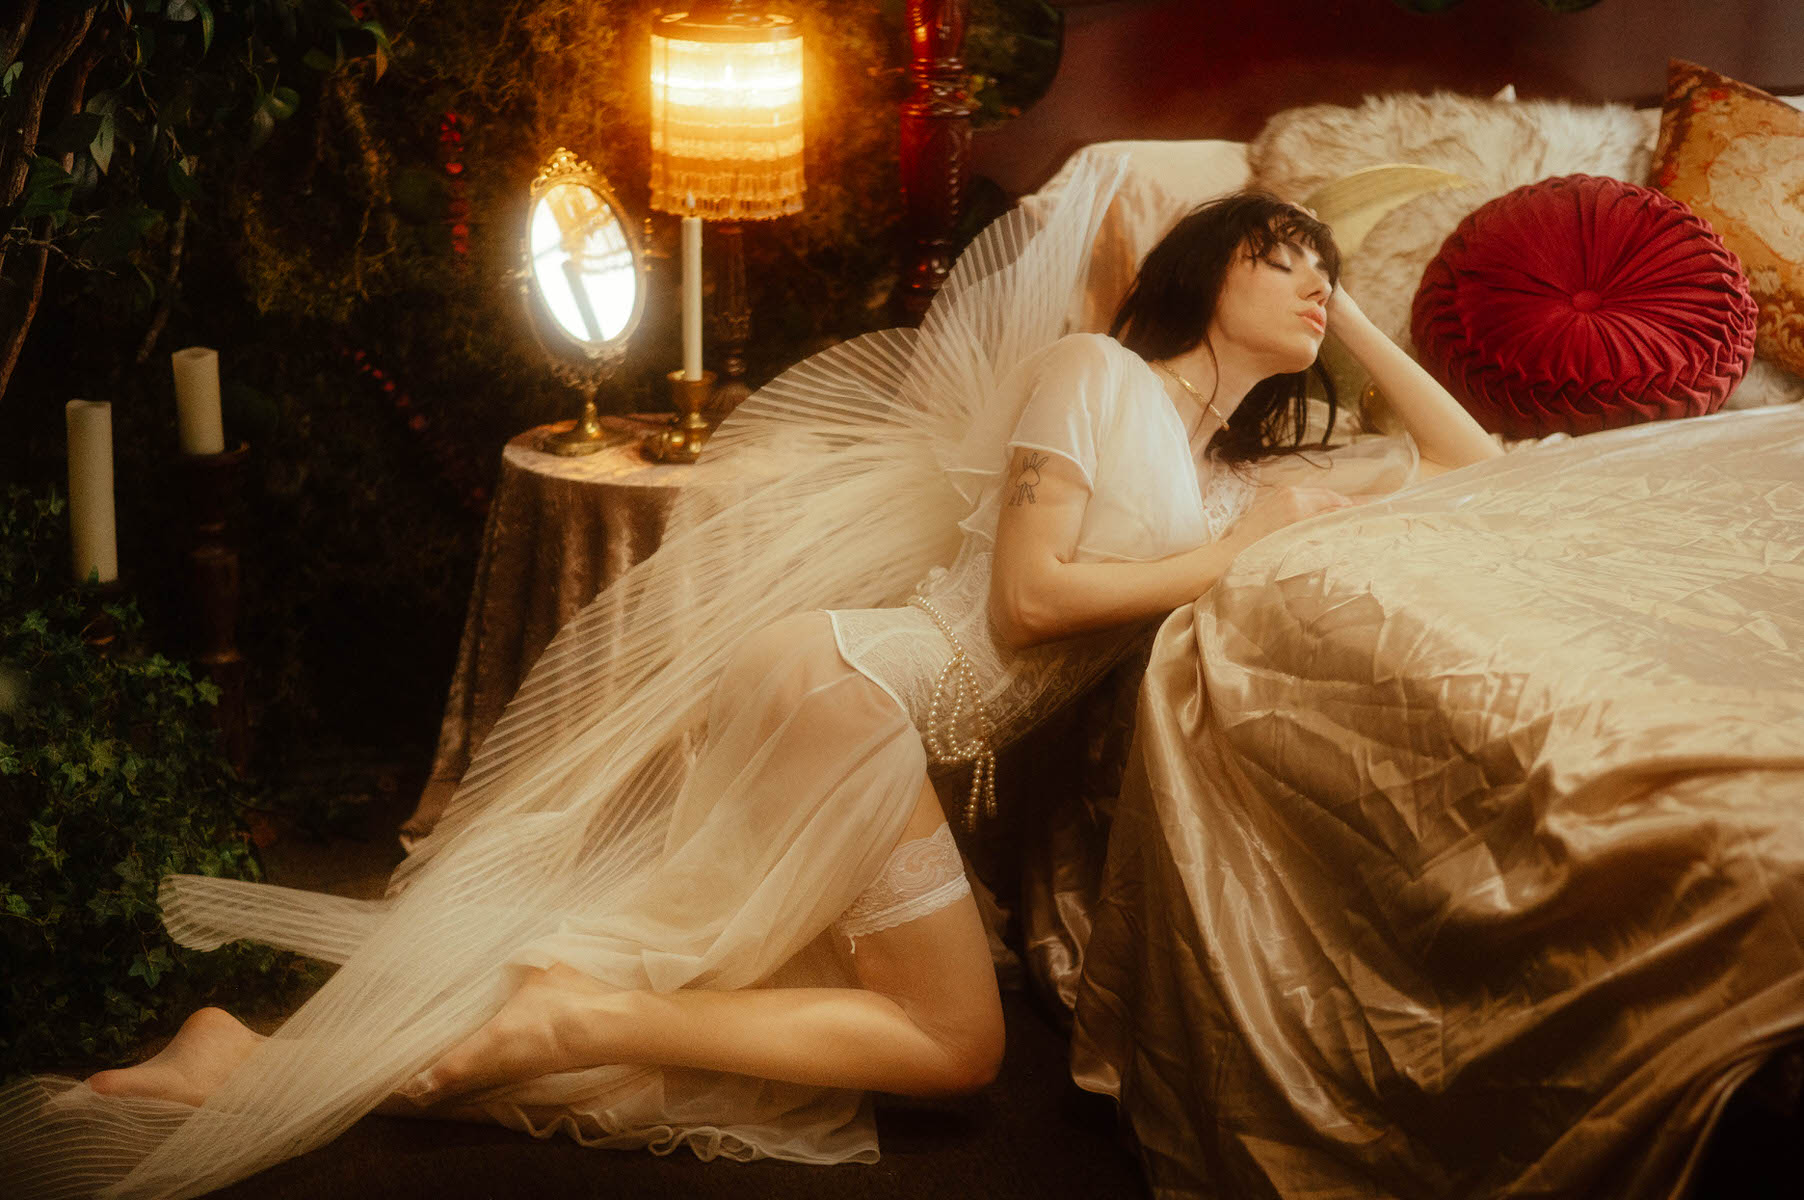 Woman in a sheer dress reclining on a bed in a Dallas boudoir studio with warm lighting and plants.